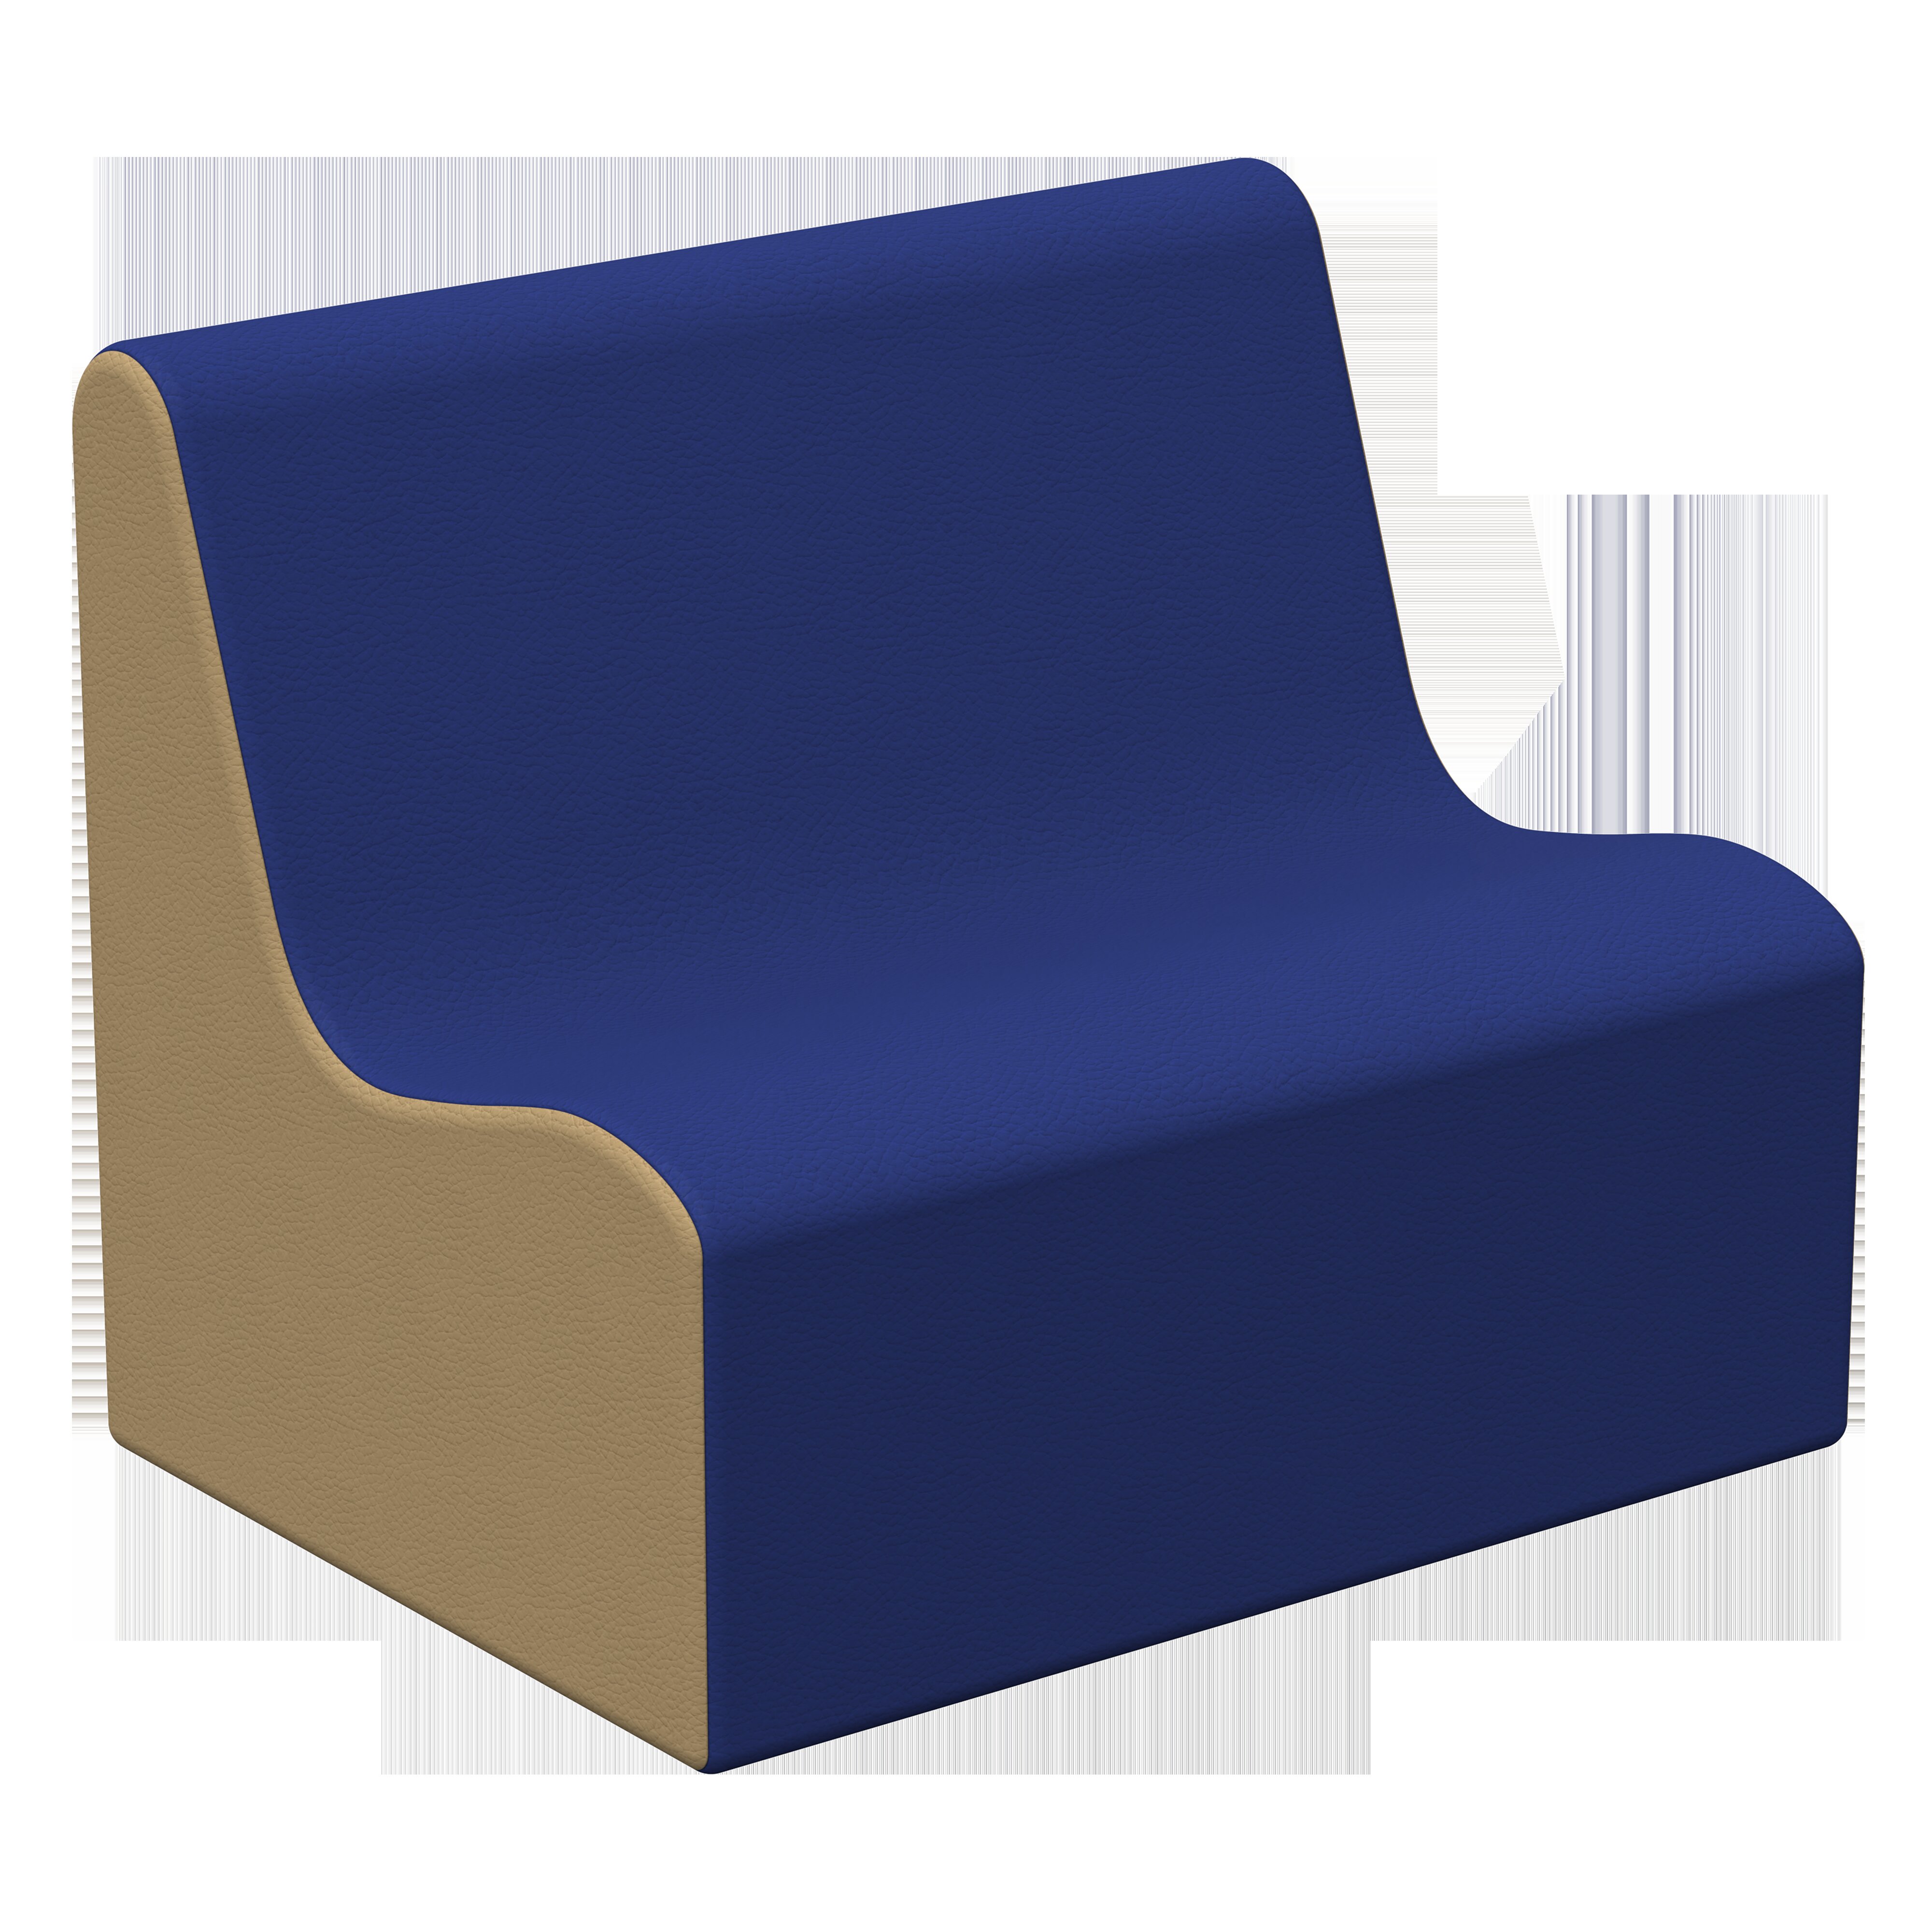 Factory Direct Partners Softscape Wave Preschool Soft Seating